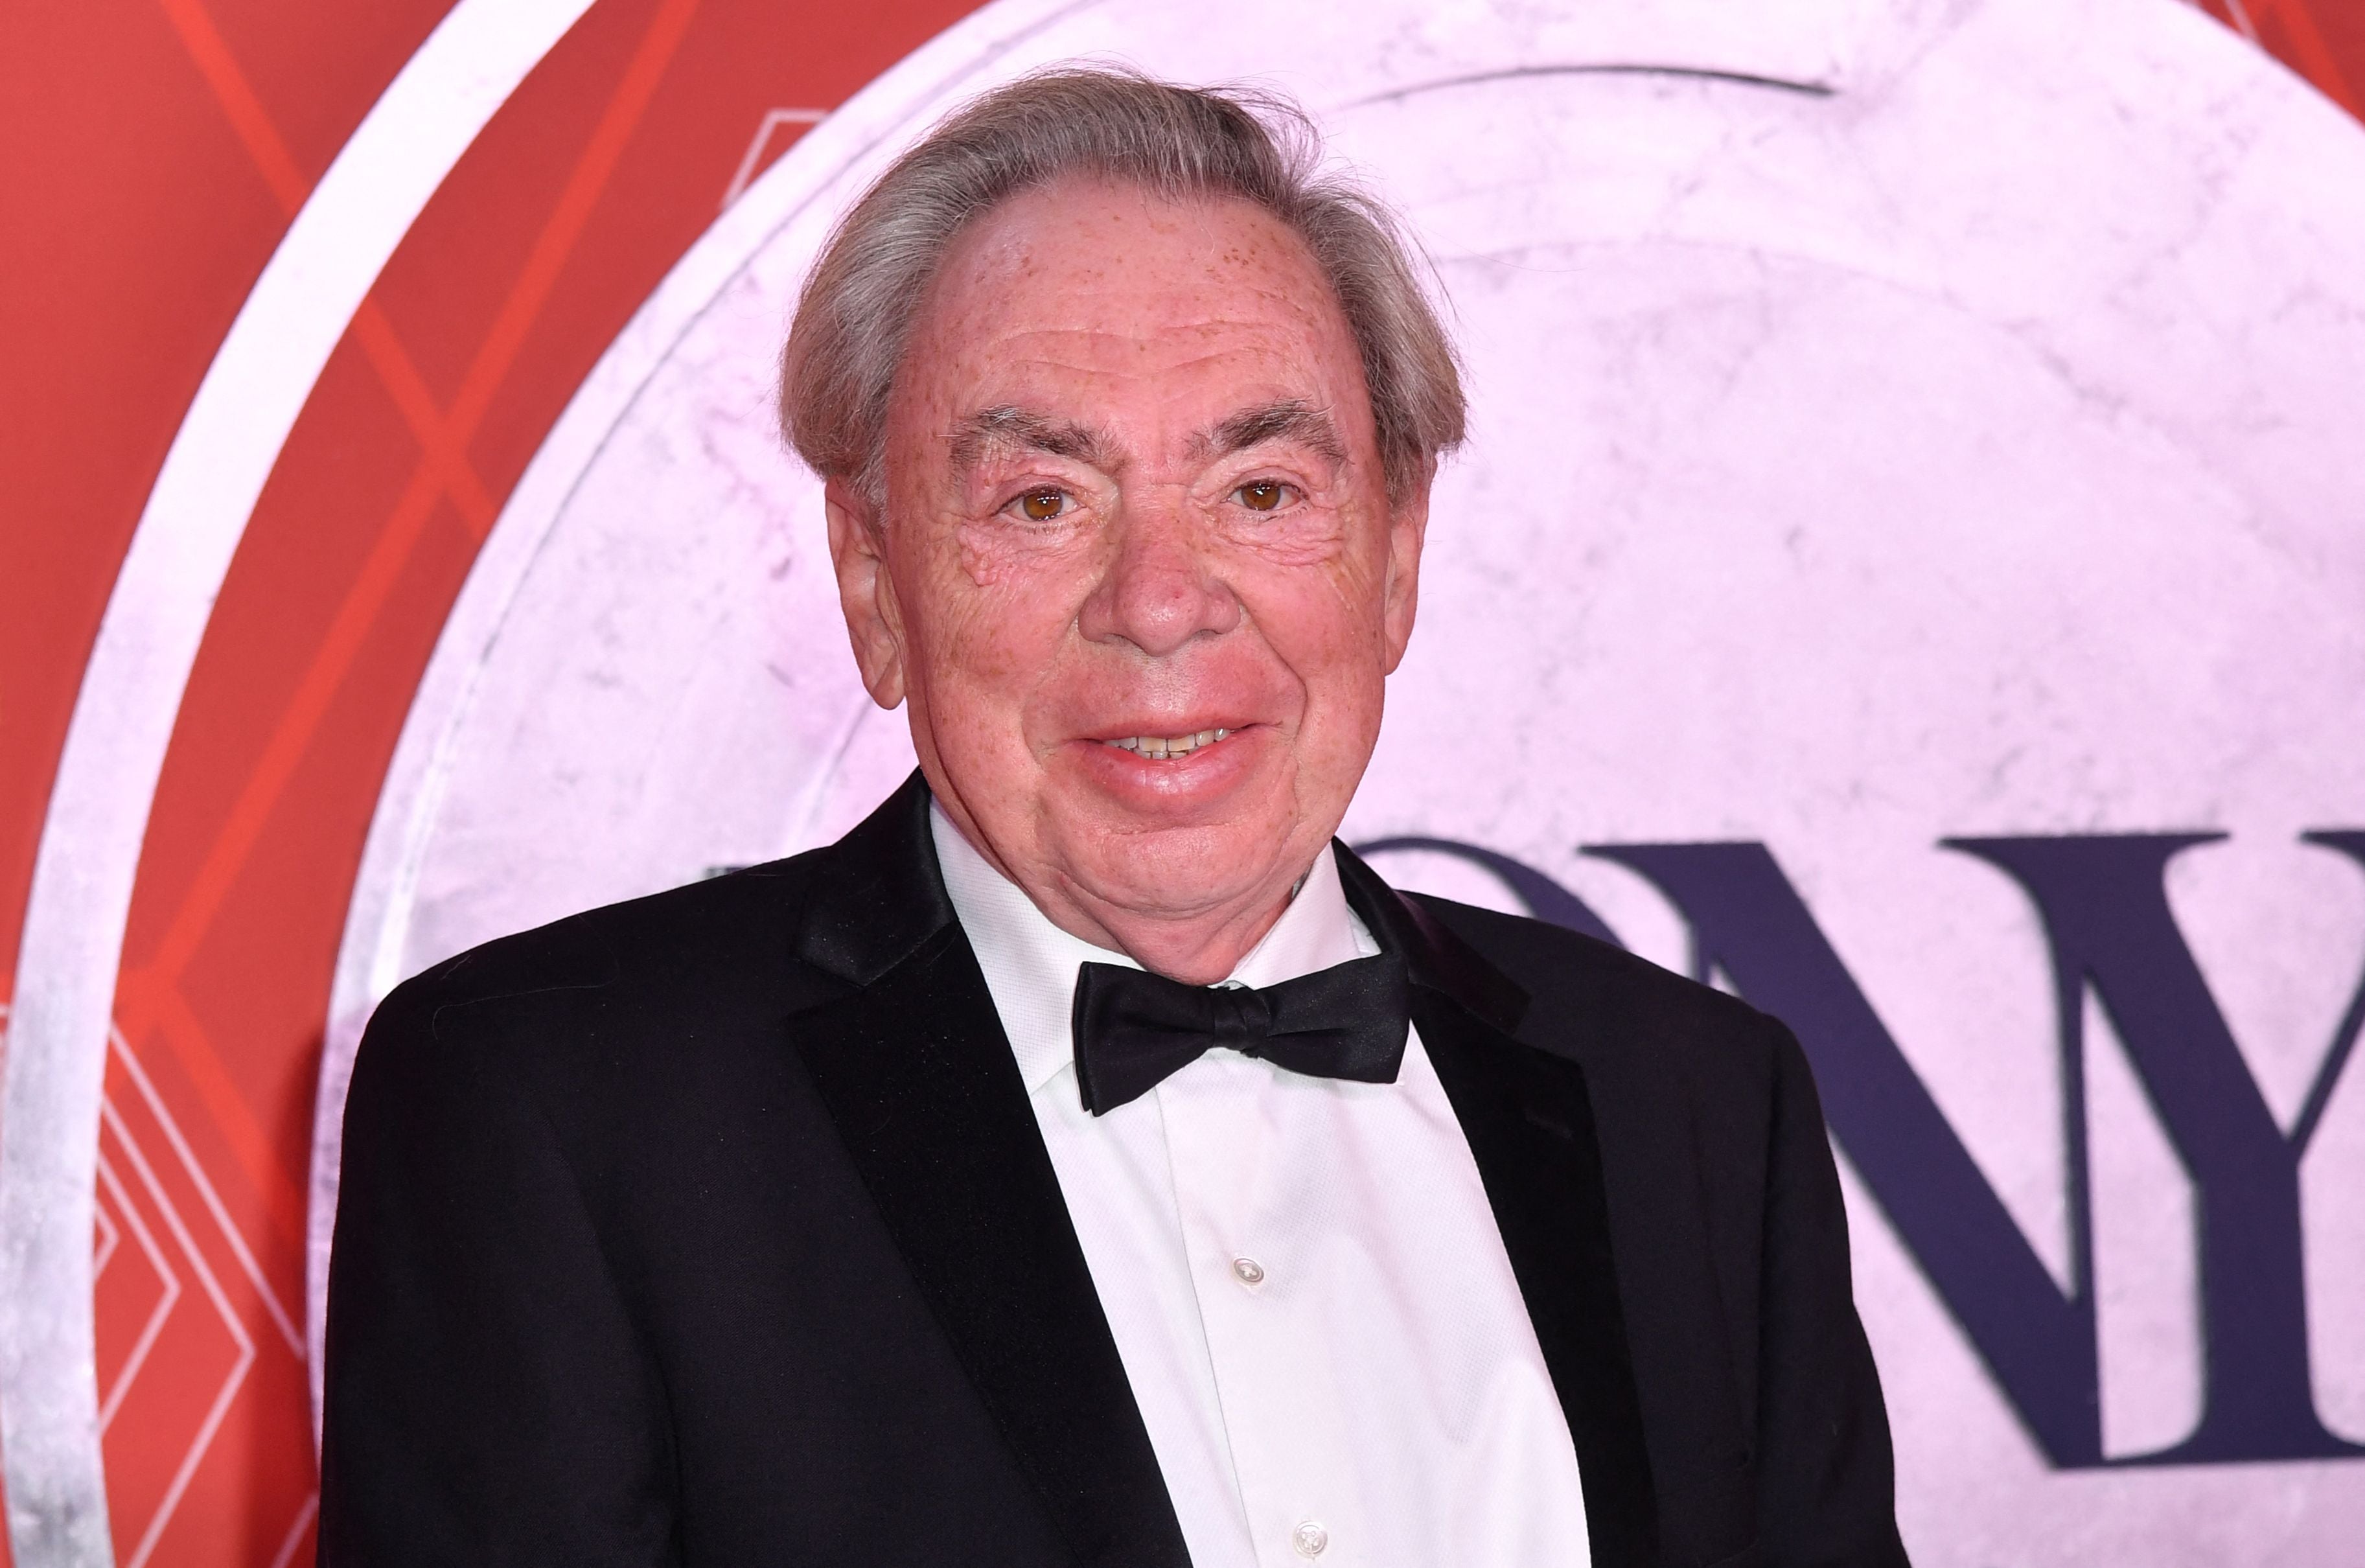 Lloyd Webber has hinted that the show will open on Broadway next spring